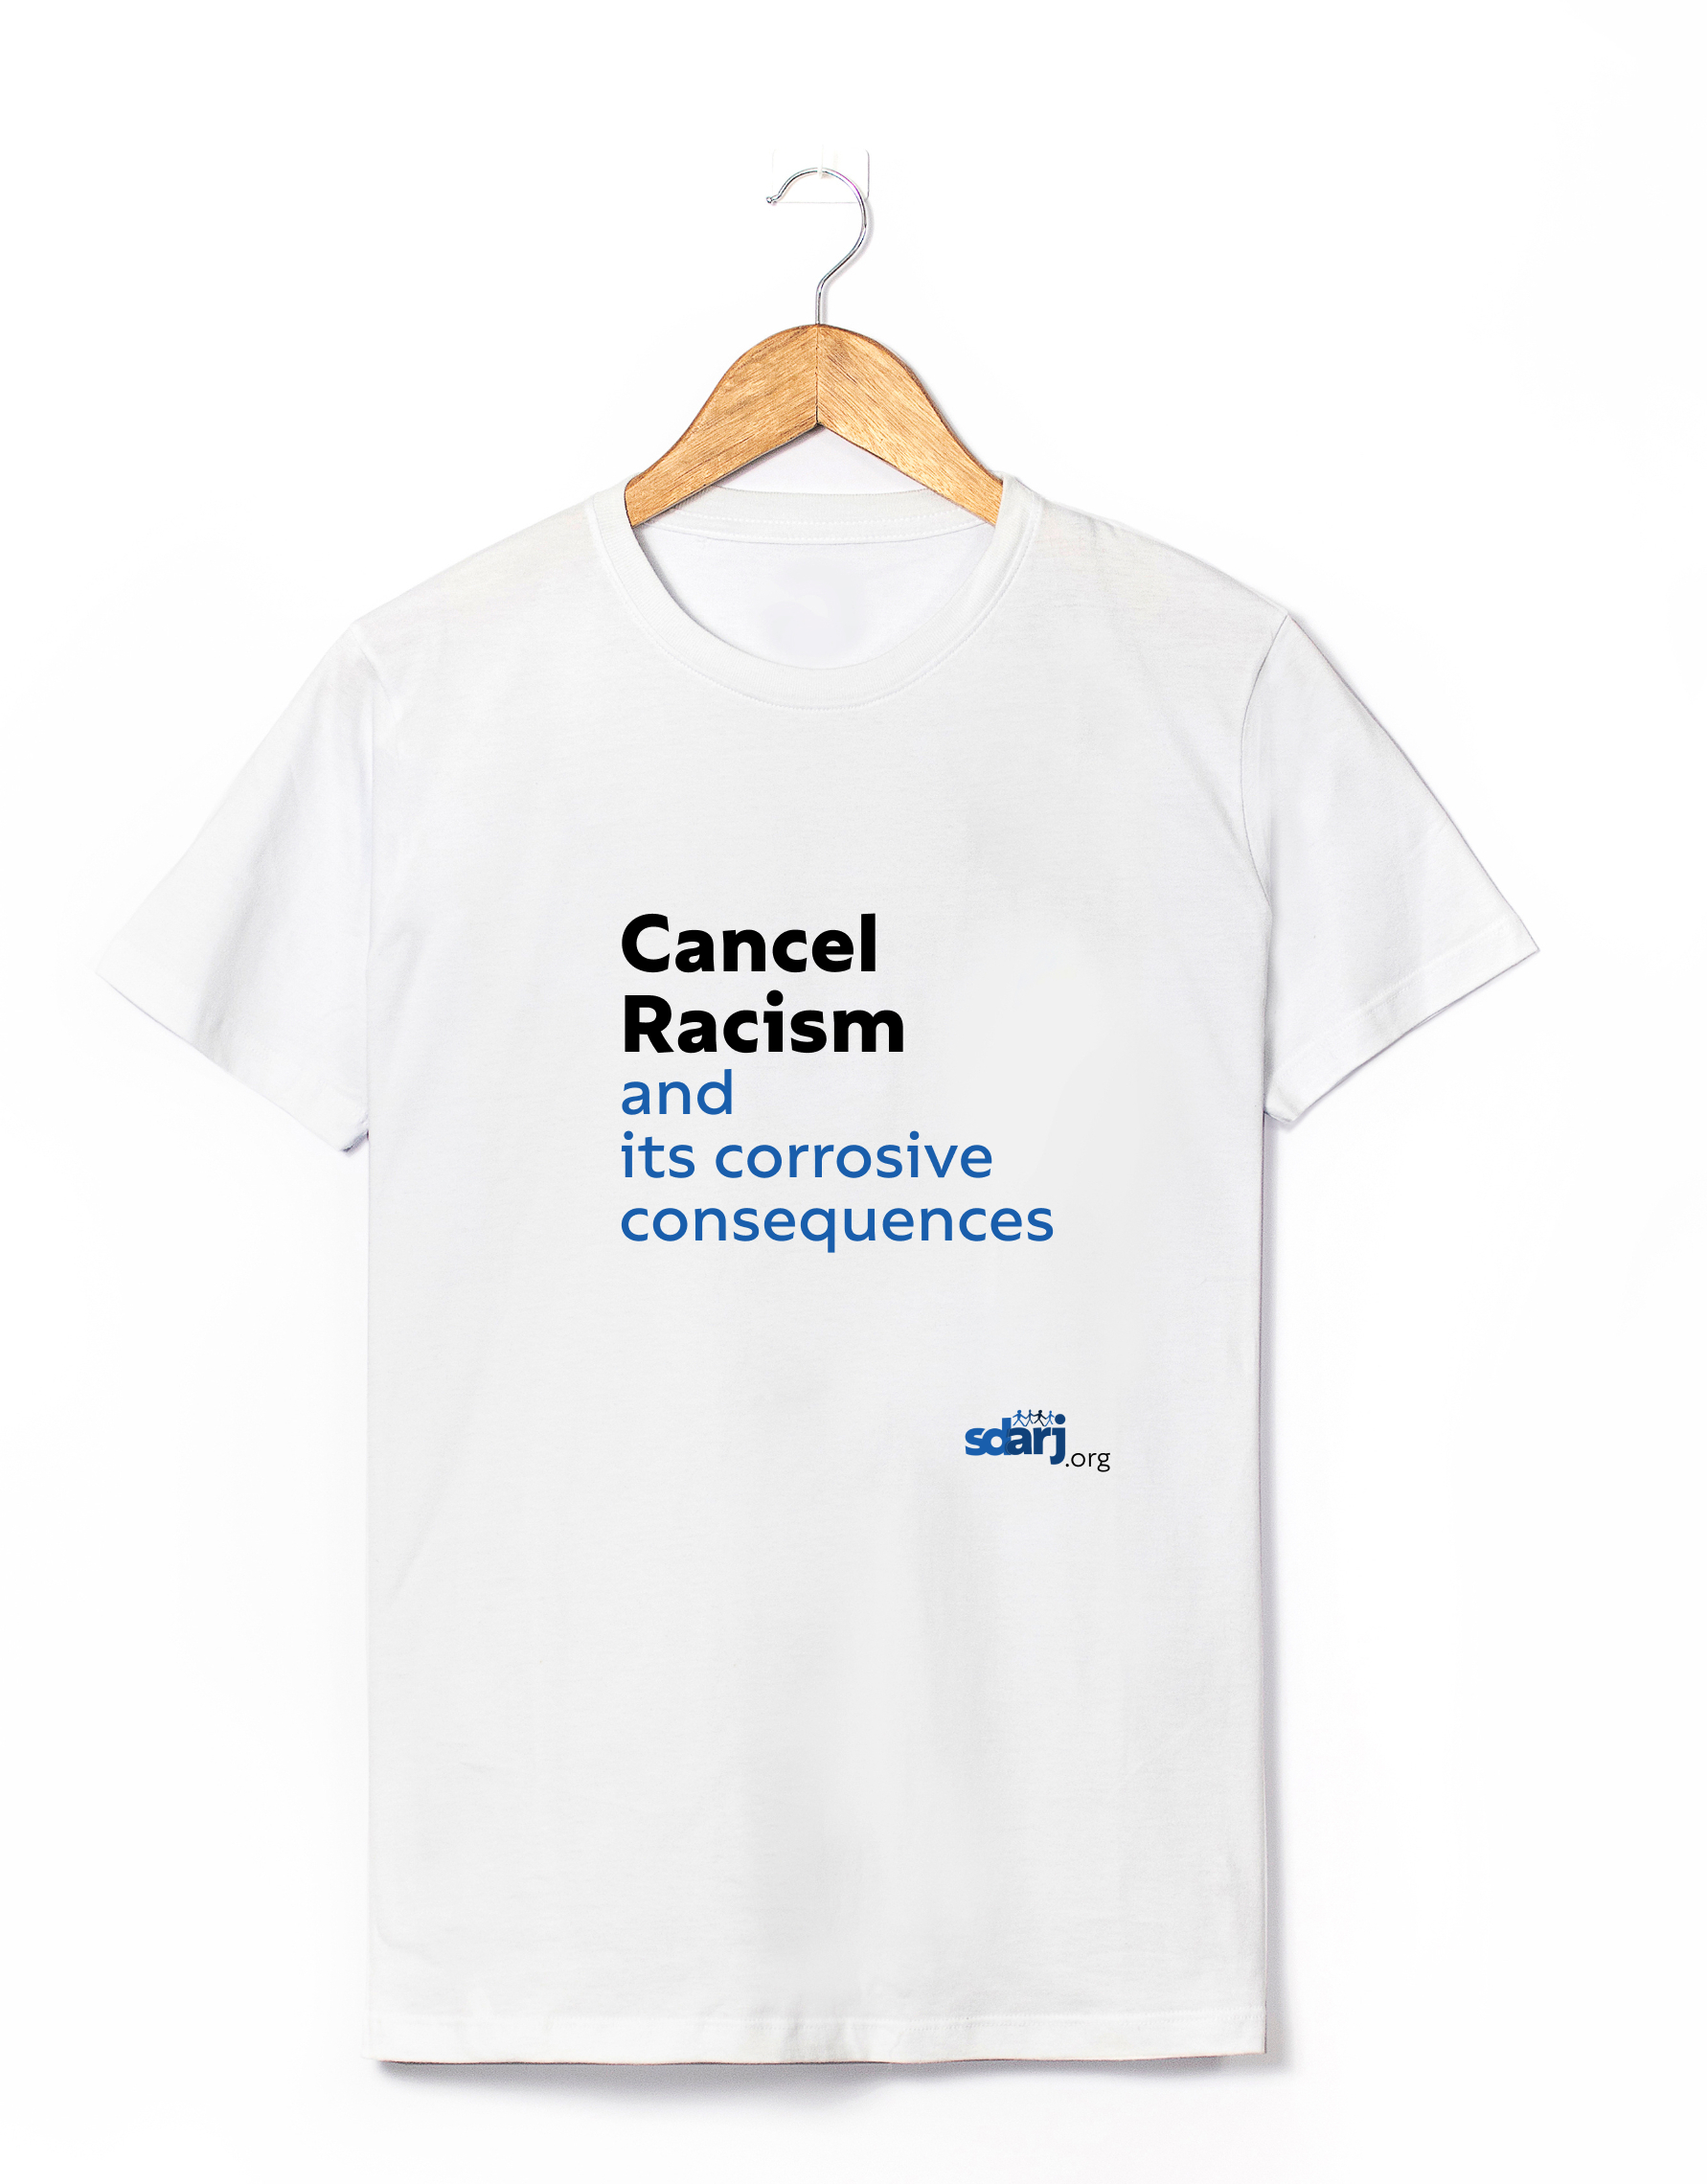 Cancel Racism – T-Shirt Delaware Alliance for Justice